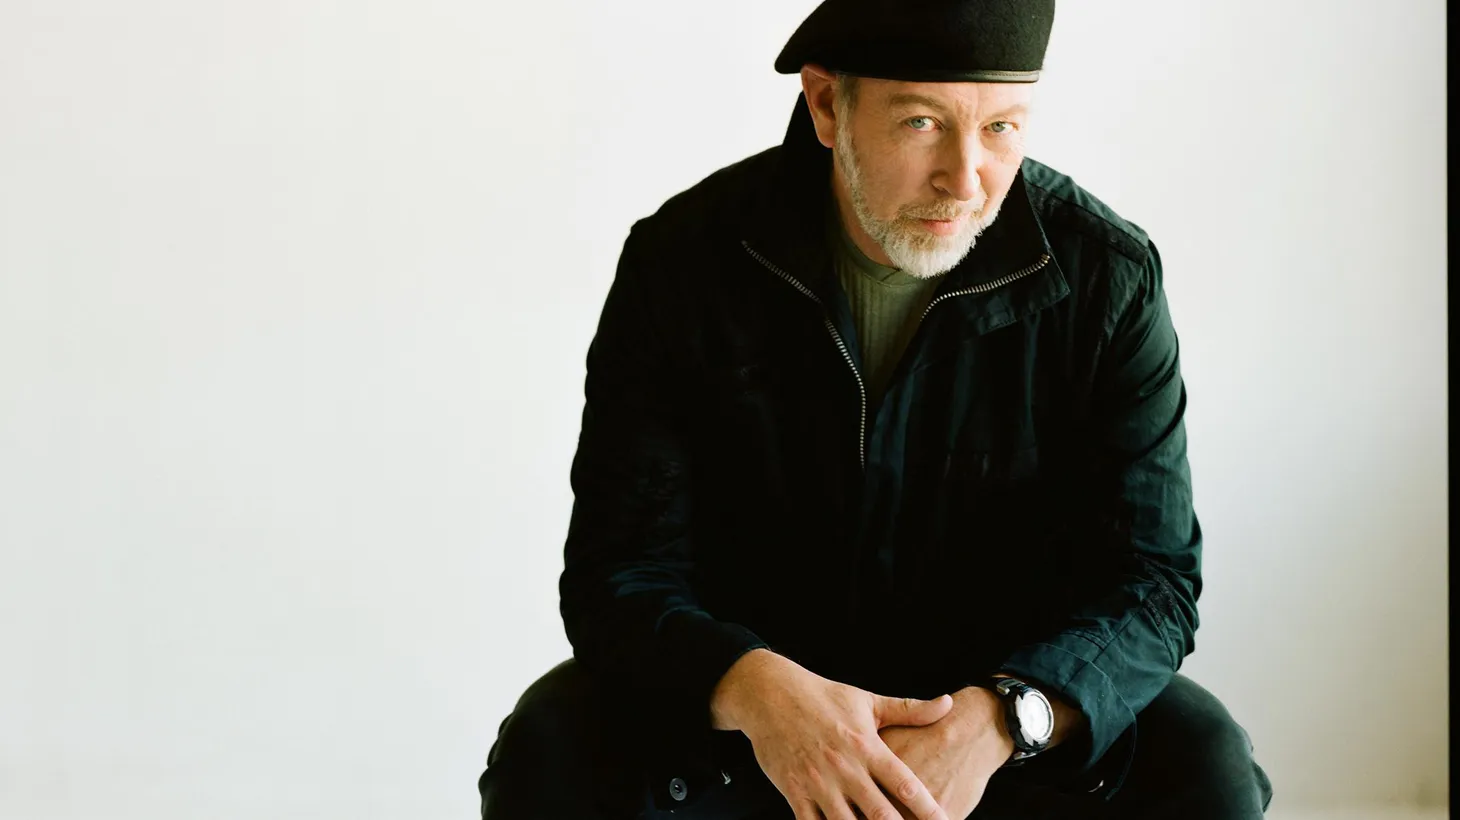 Richard Thompson is considered one of the top guitarists in the world and we heard tracks from his record Electric during this 2013 visit.